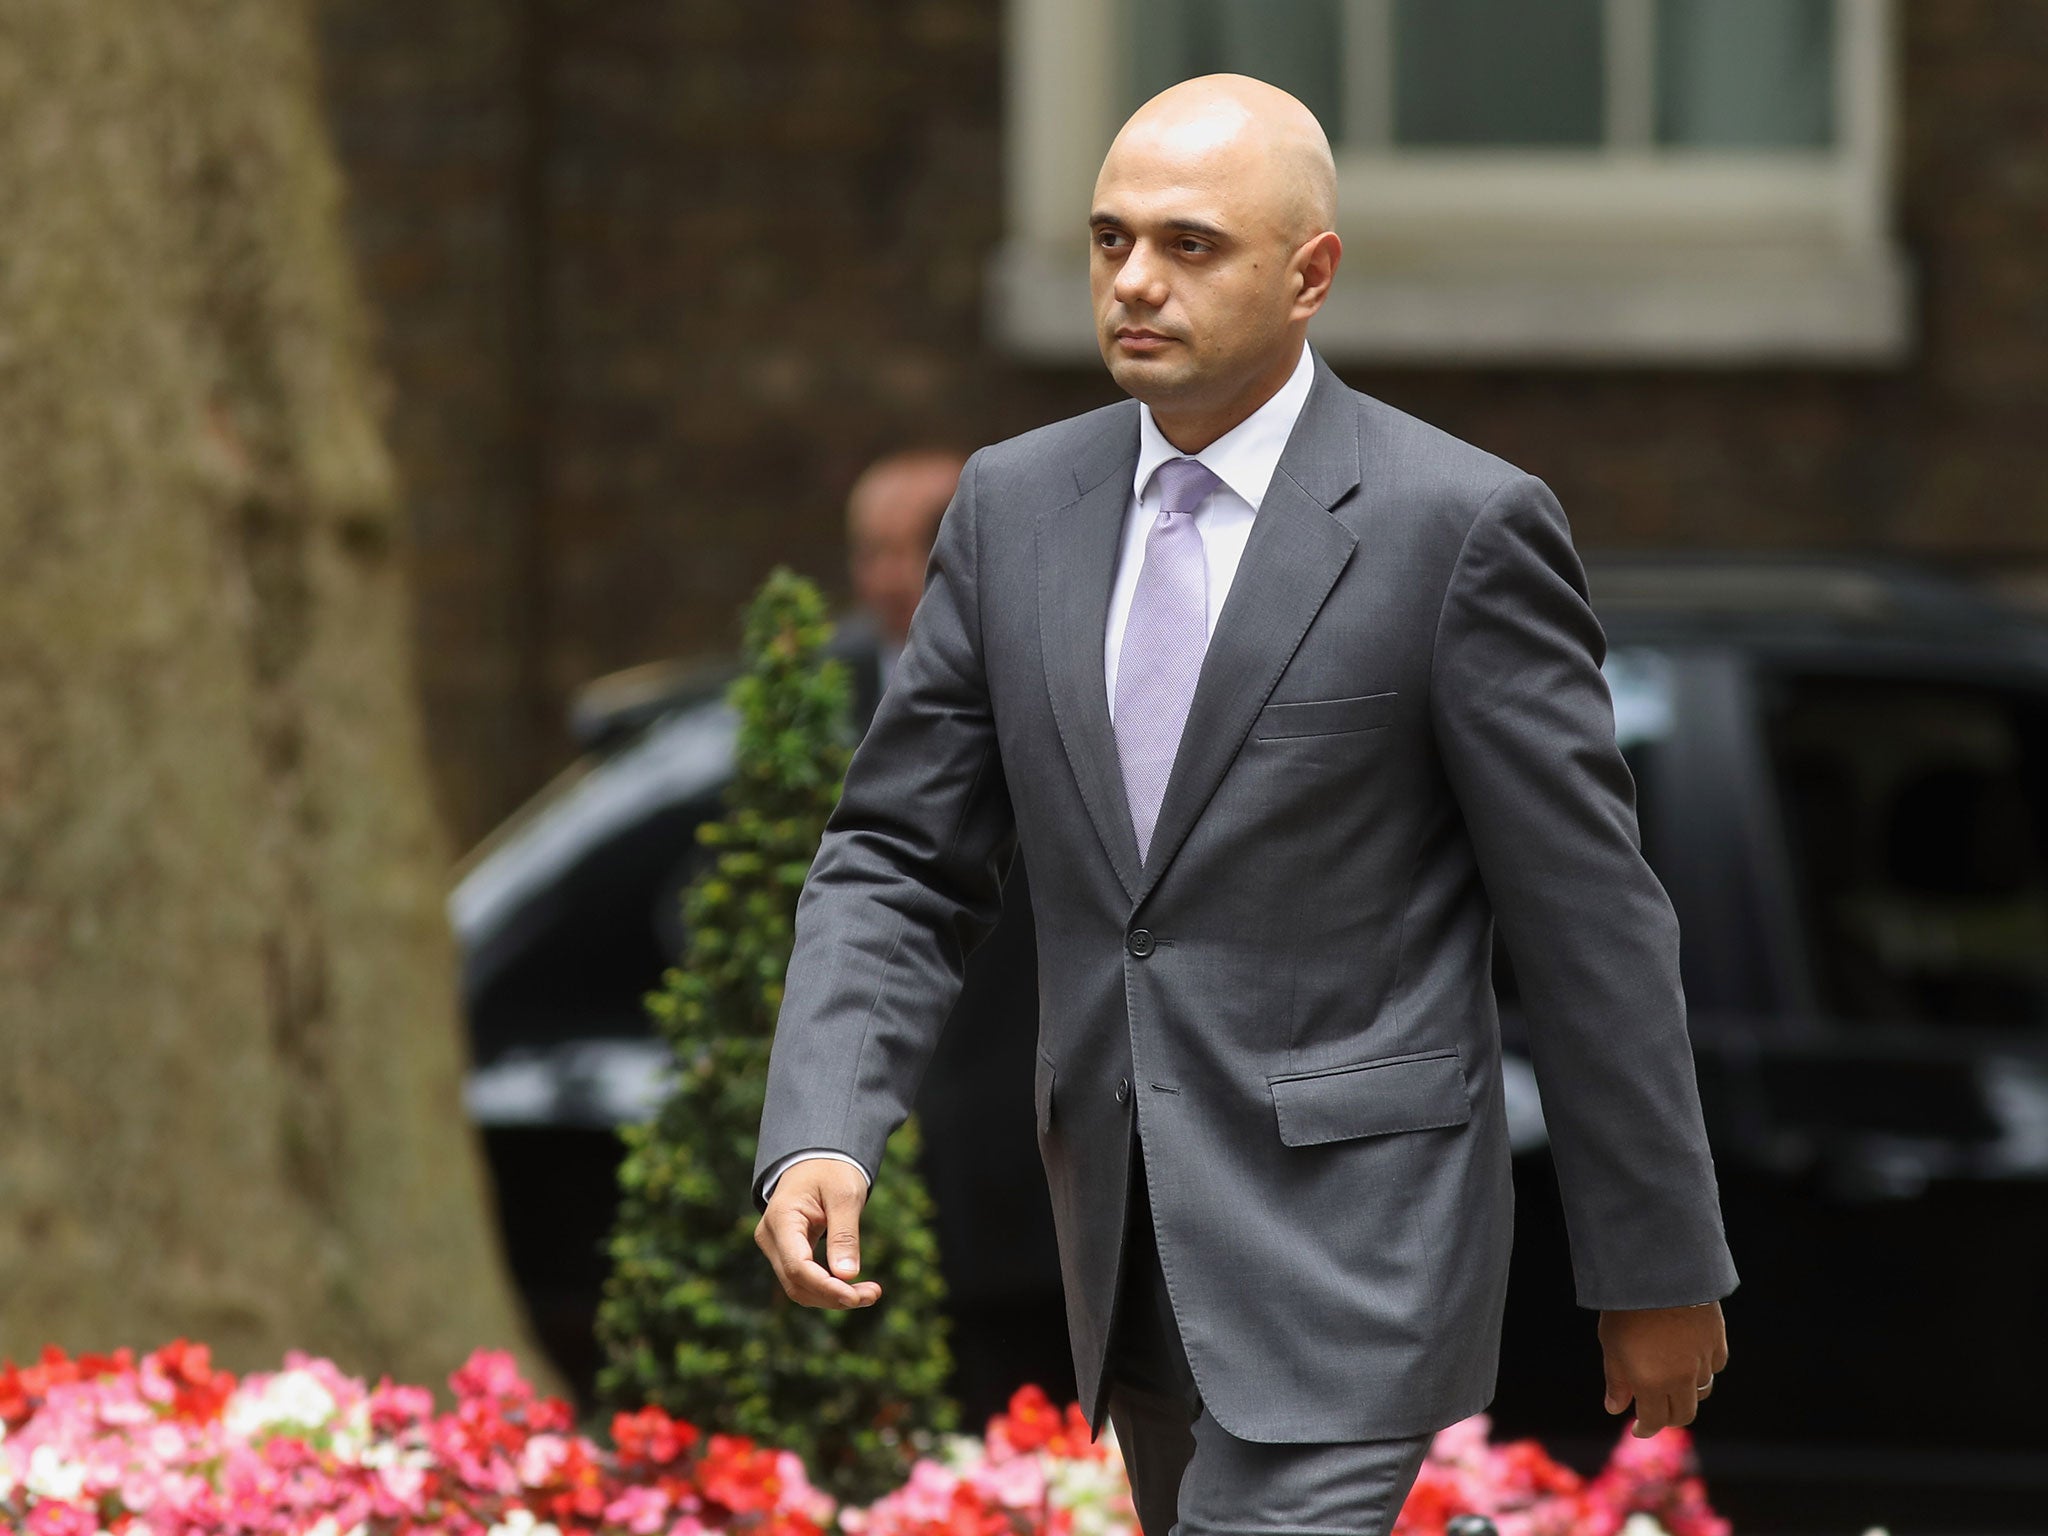 Sajid Javid, the Communities Secretary, said the Government had a 'moral duty' to build more homes